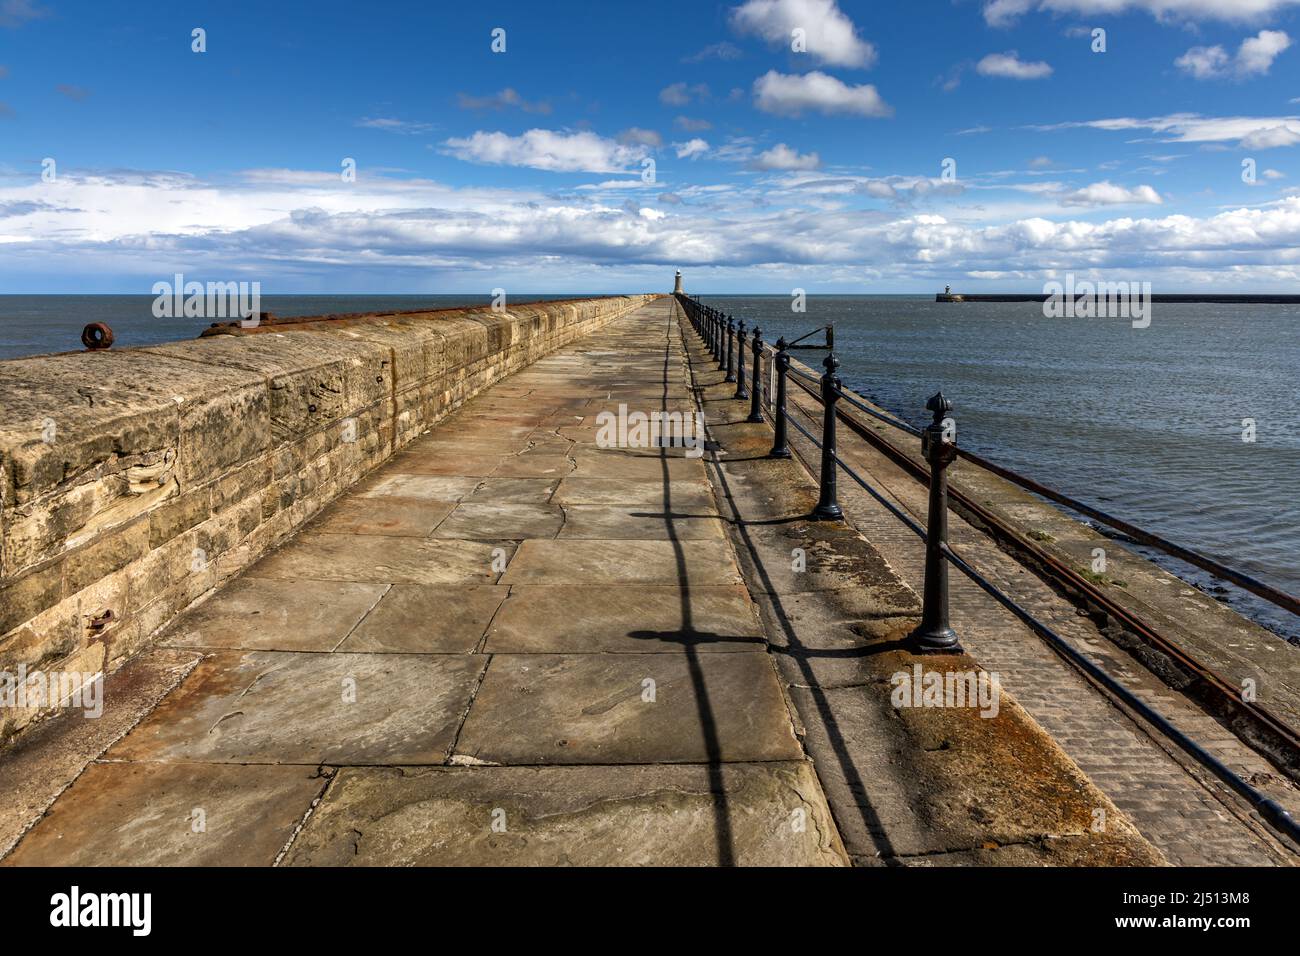 Tynemouth North Pier and Lighthouse at the mouth of the River Tyne,Taken on a sunny spring day. Stock Photo